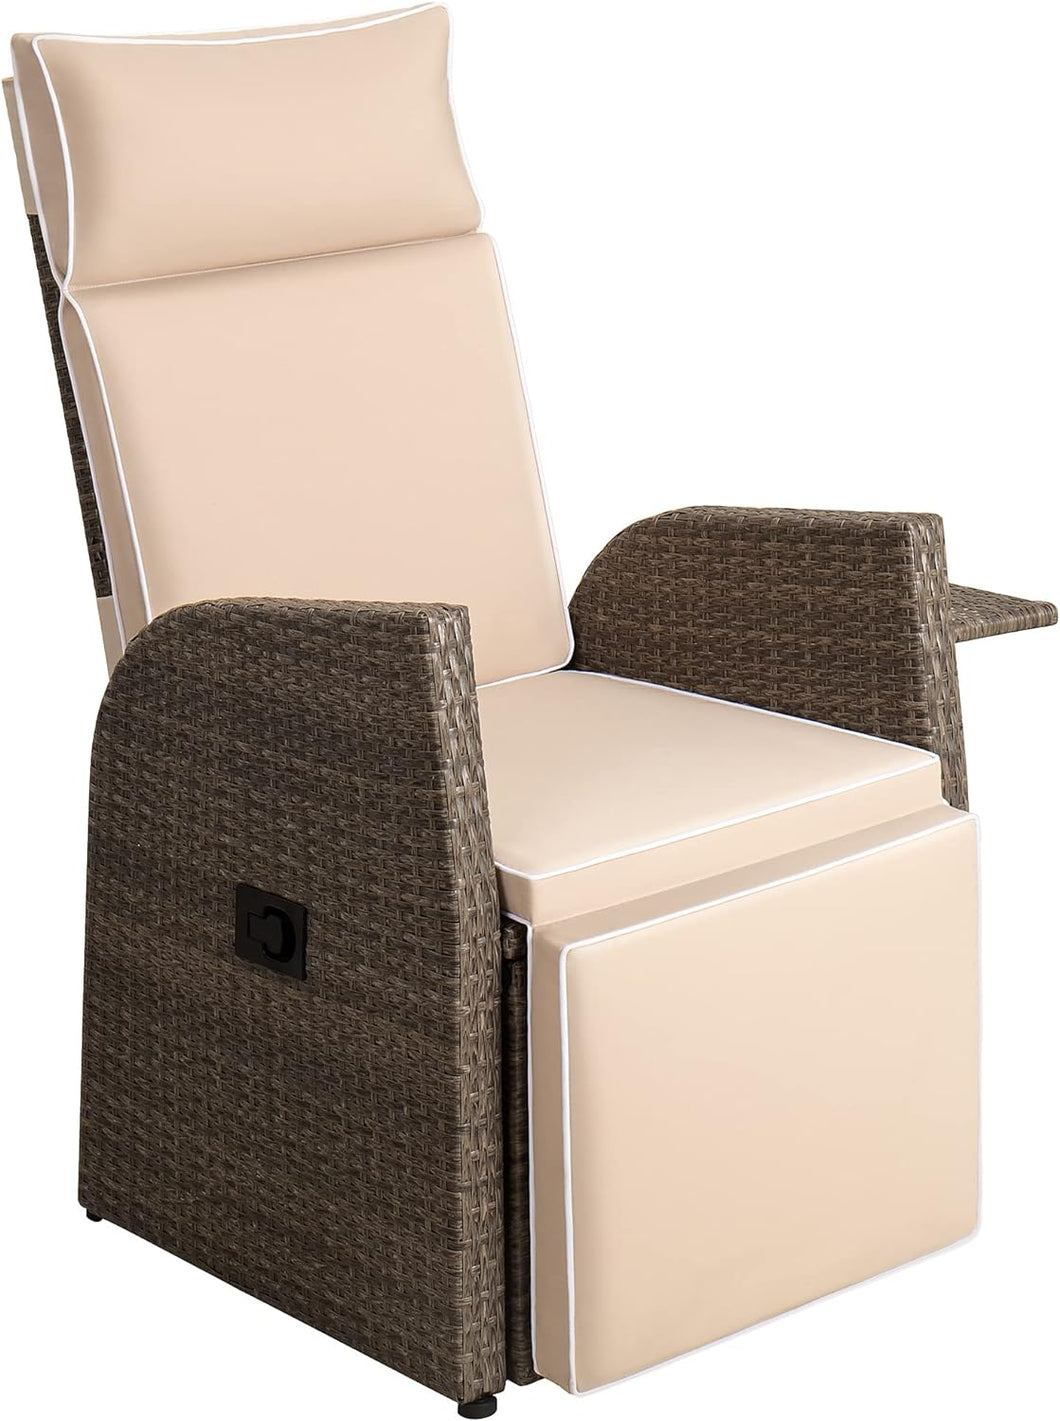 Patio Outdoor Recliner Chair PE Wicker Reclining Lounge Chair Lawn Furniture with Flip-up Table, Beige